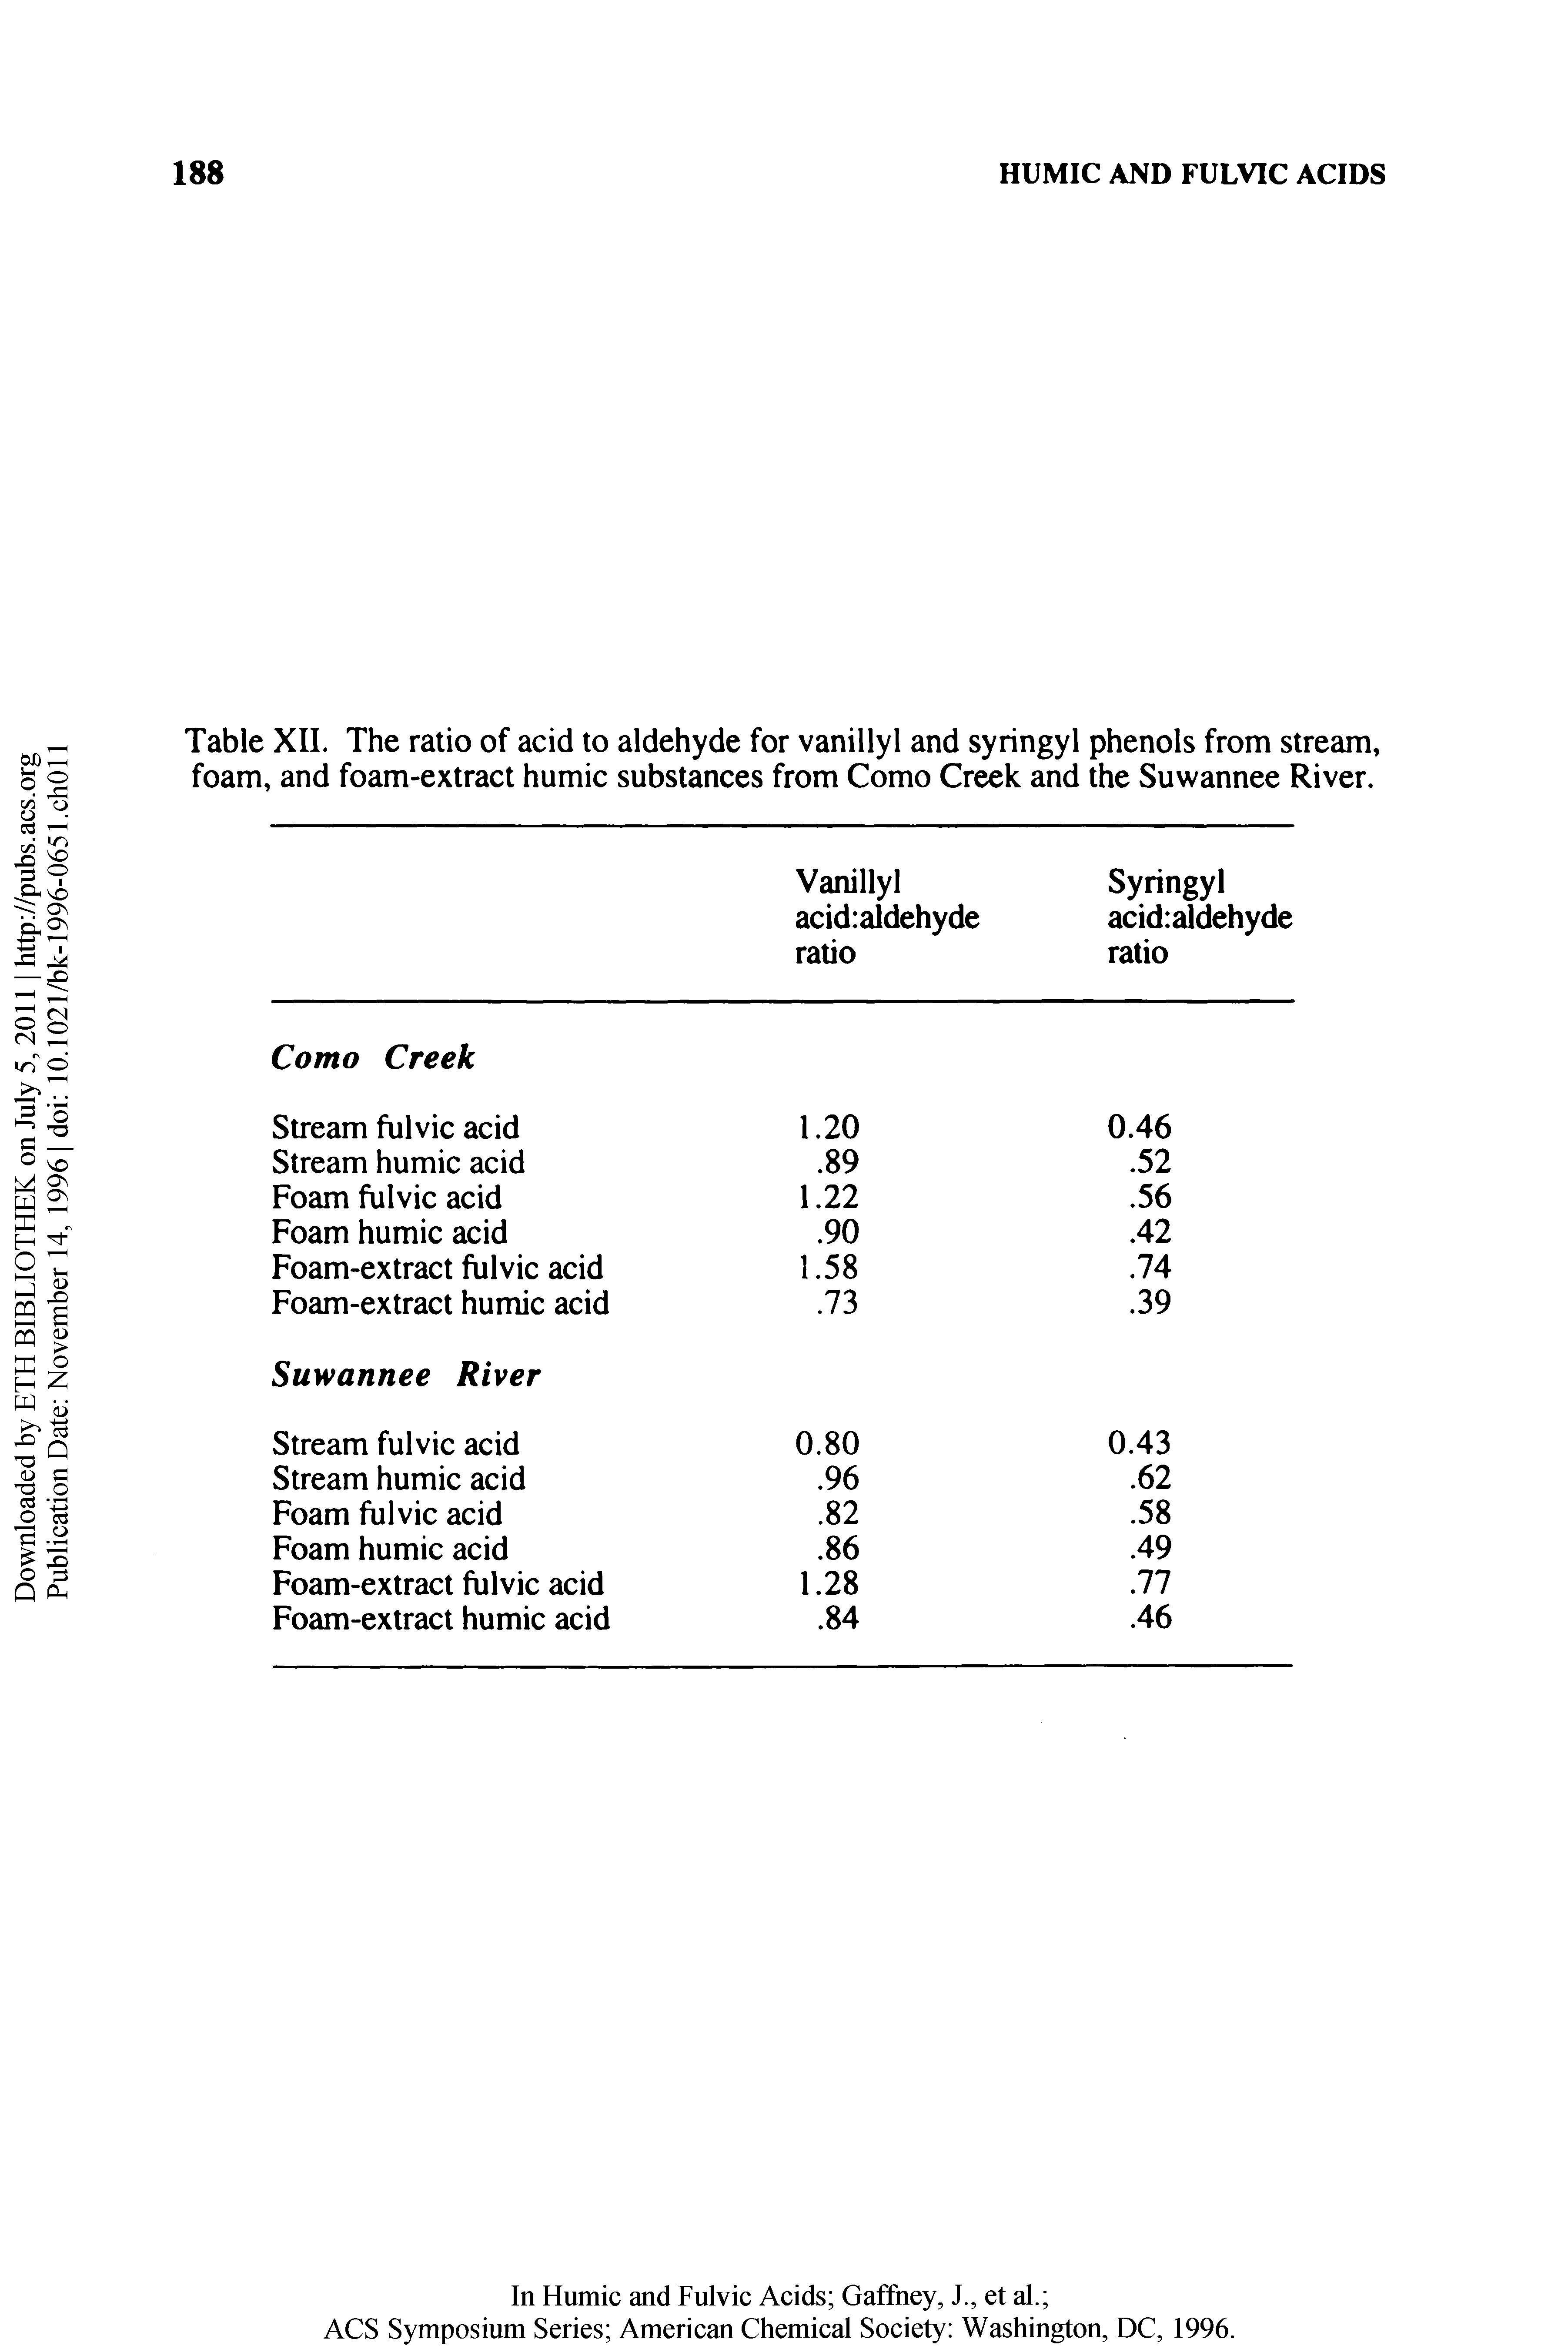 Table XII. The ratio of acid to aldehyde for vanillyl and syringyl phenols from stream, foam, and foam-extract humic substances from Como Creek and the Suwannee River.